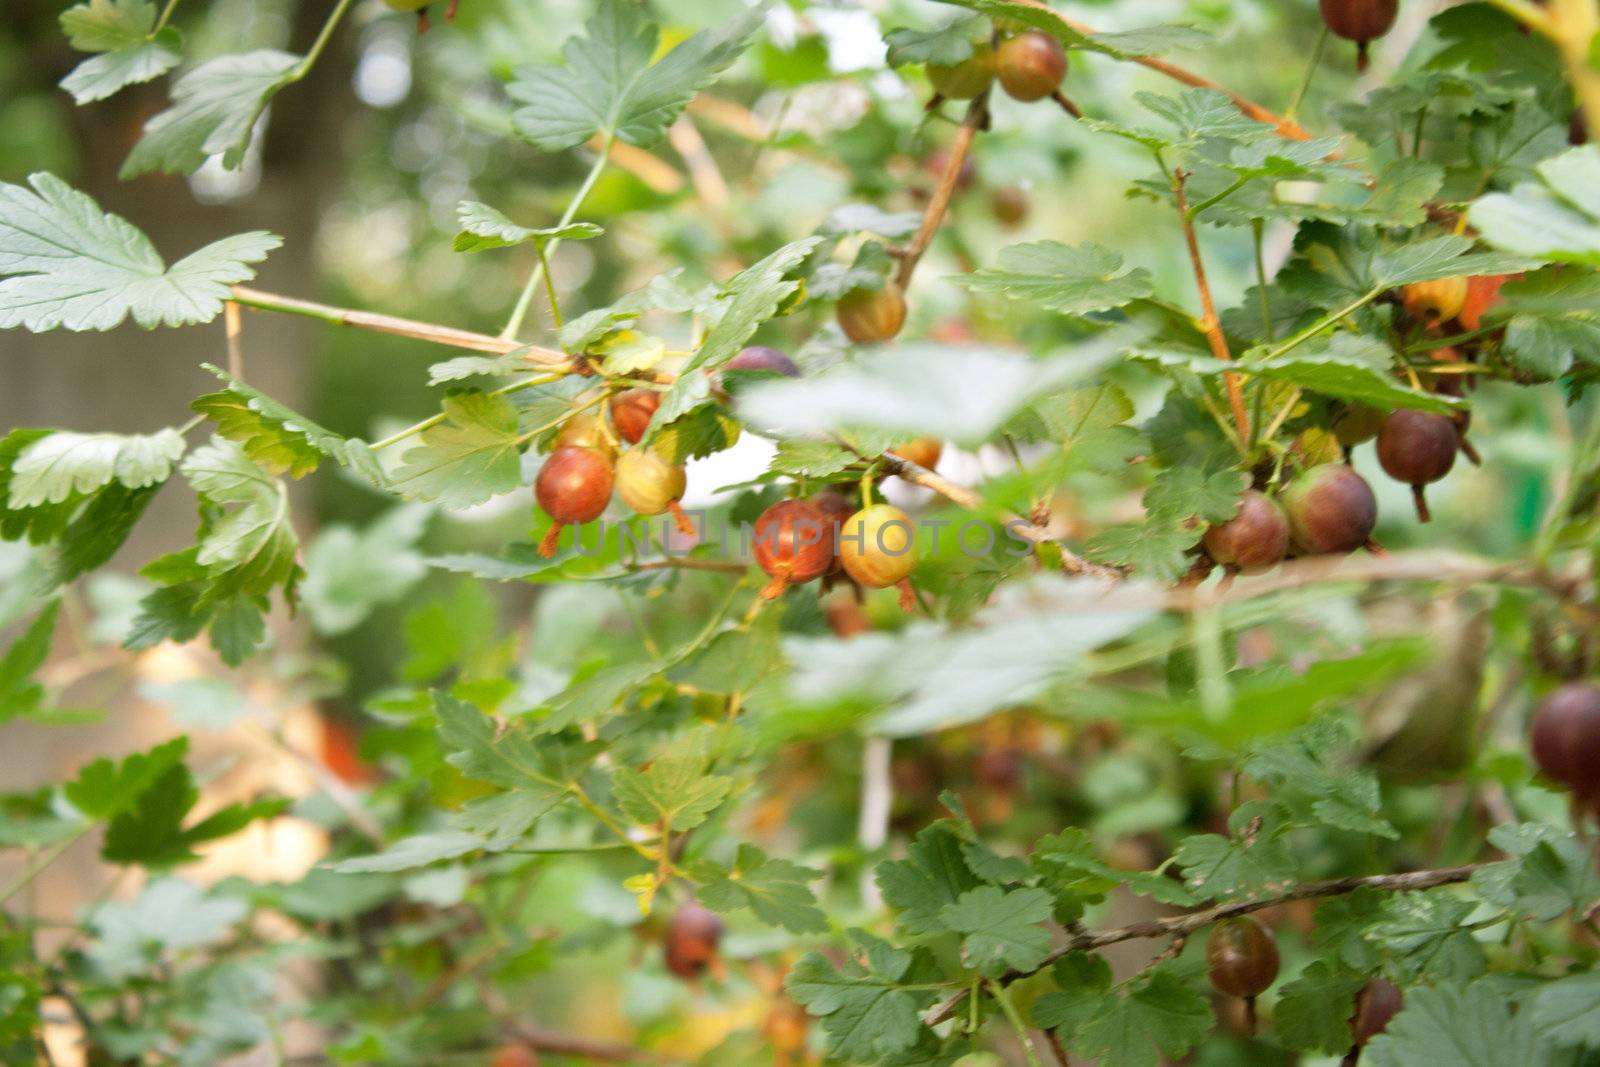 Gooseberry bush with ripe berries by victosha